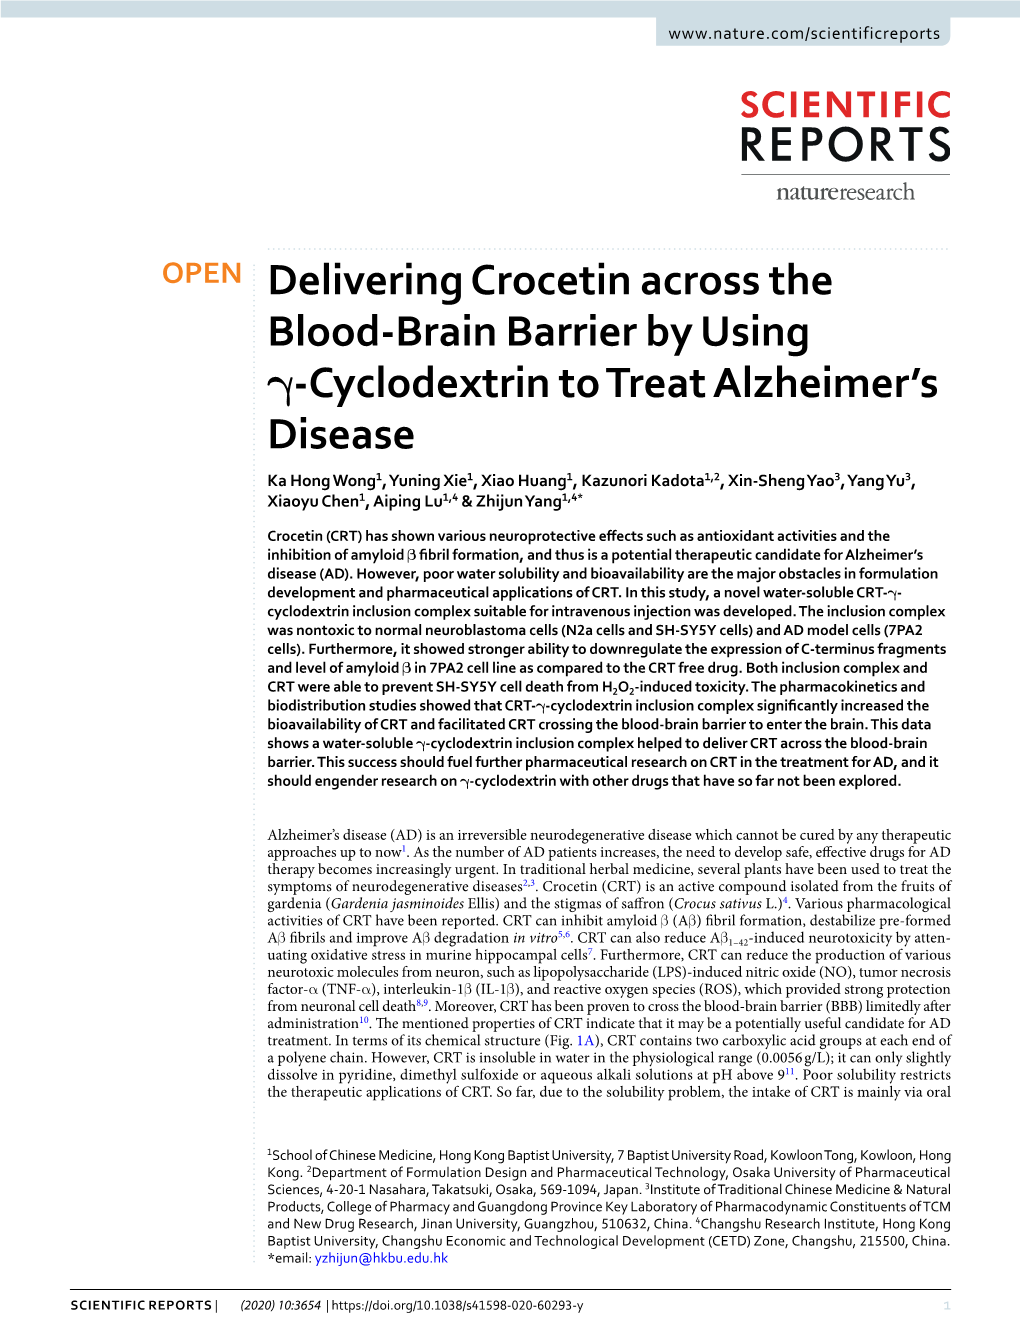 Delivering Crocetin Across the Blood-Brain Barrier by Using Γ